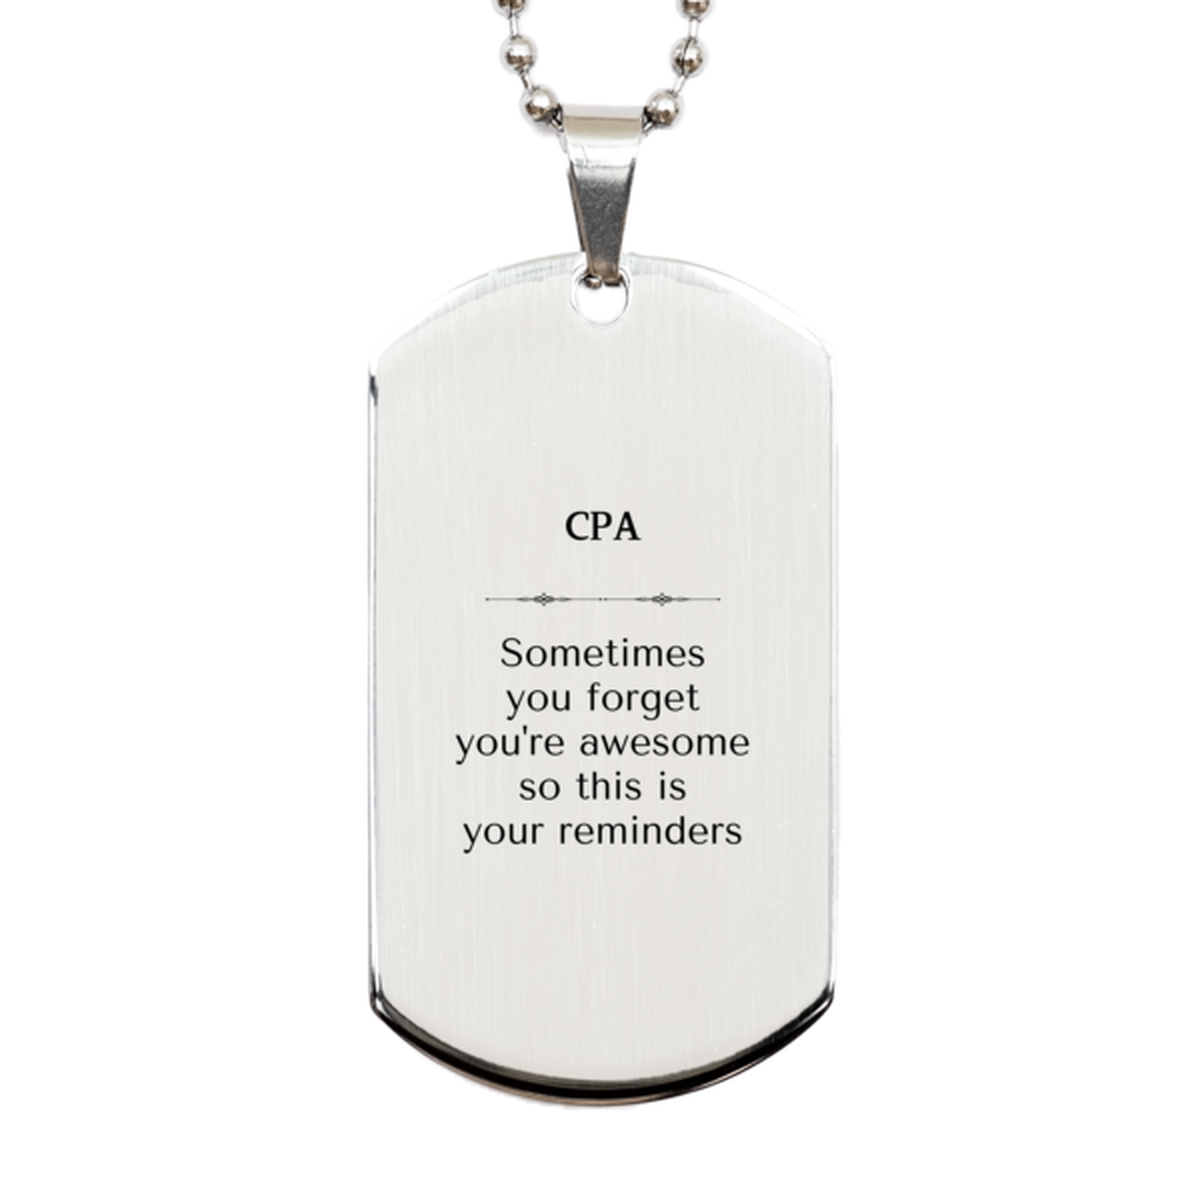 Sentimental CPA Silver Dog Tag, CPA Sometimes you forget you're awesome so this is your reminders, Graduation Christmas Birthday Gifts for CPA, Men, Women, Coworkers